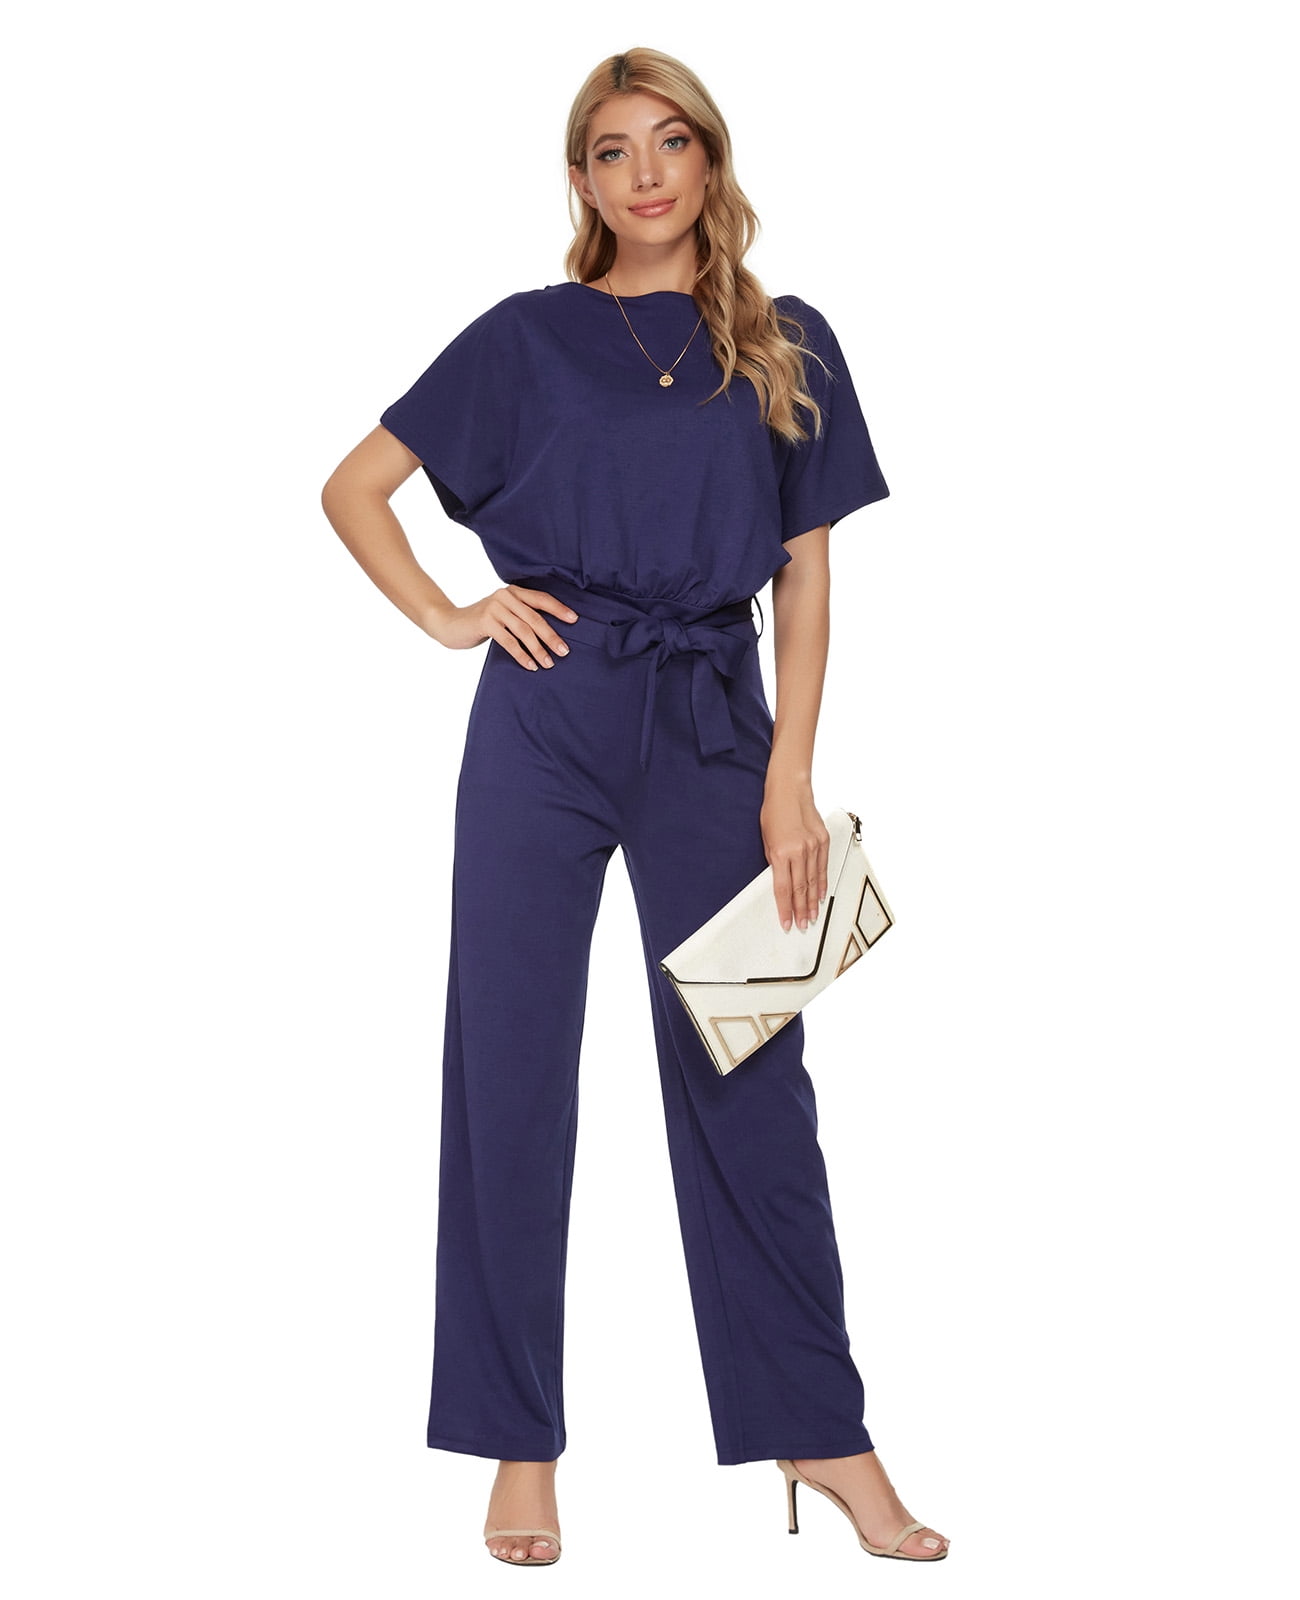 MINTLIMIT Womens Jumpsuit Elegant High Waist Short Sleeve Playsuit Casual Wide Leg Pants Loose Rompers Overall 